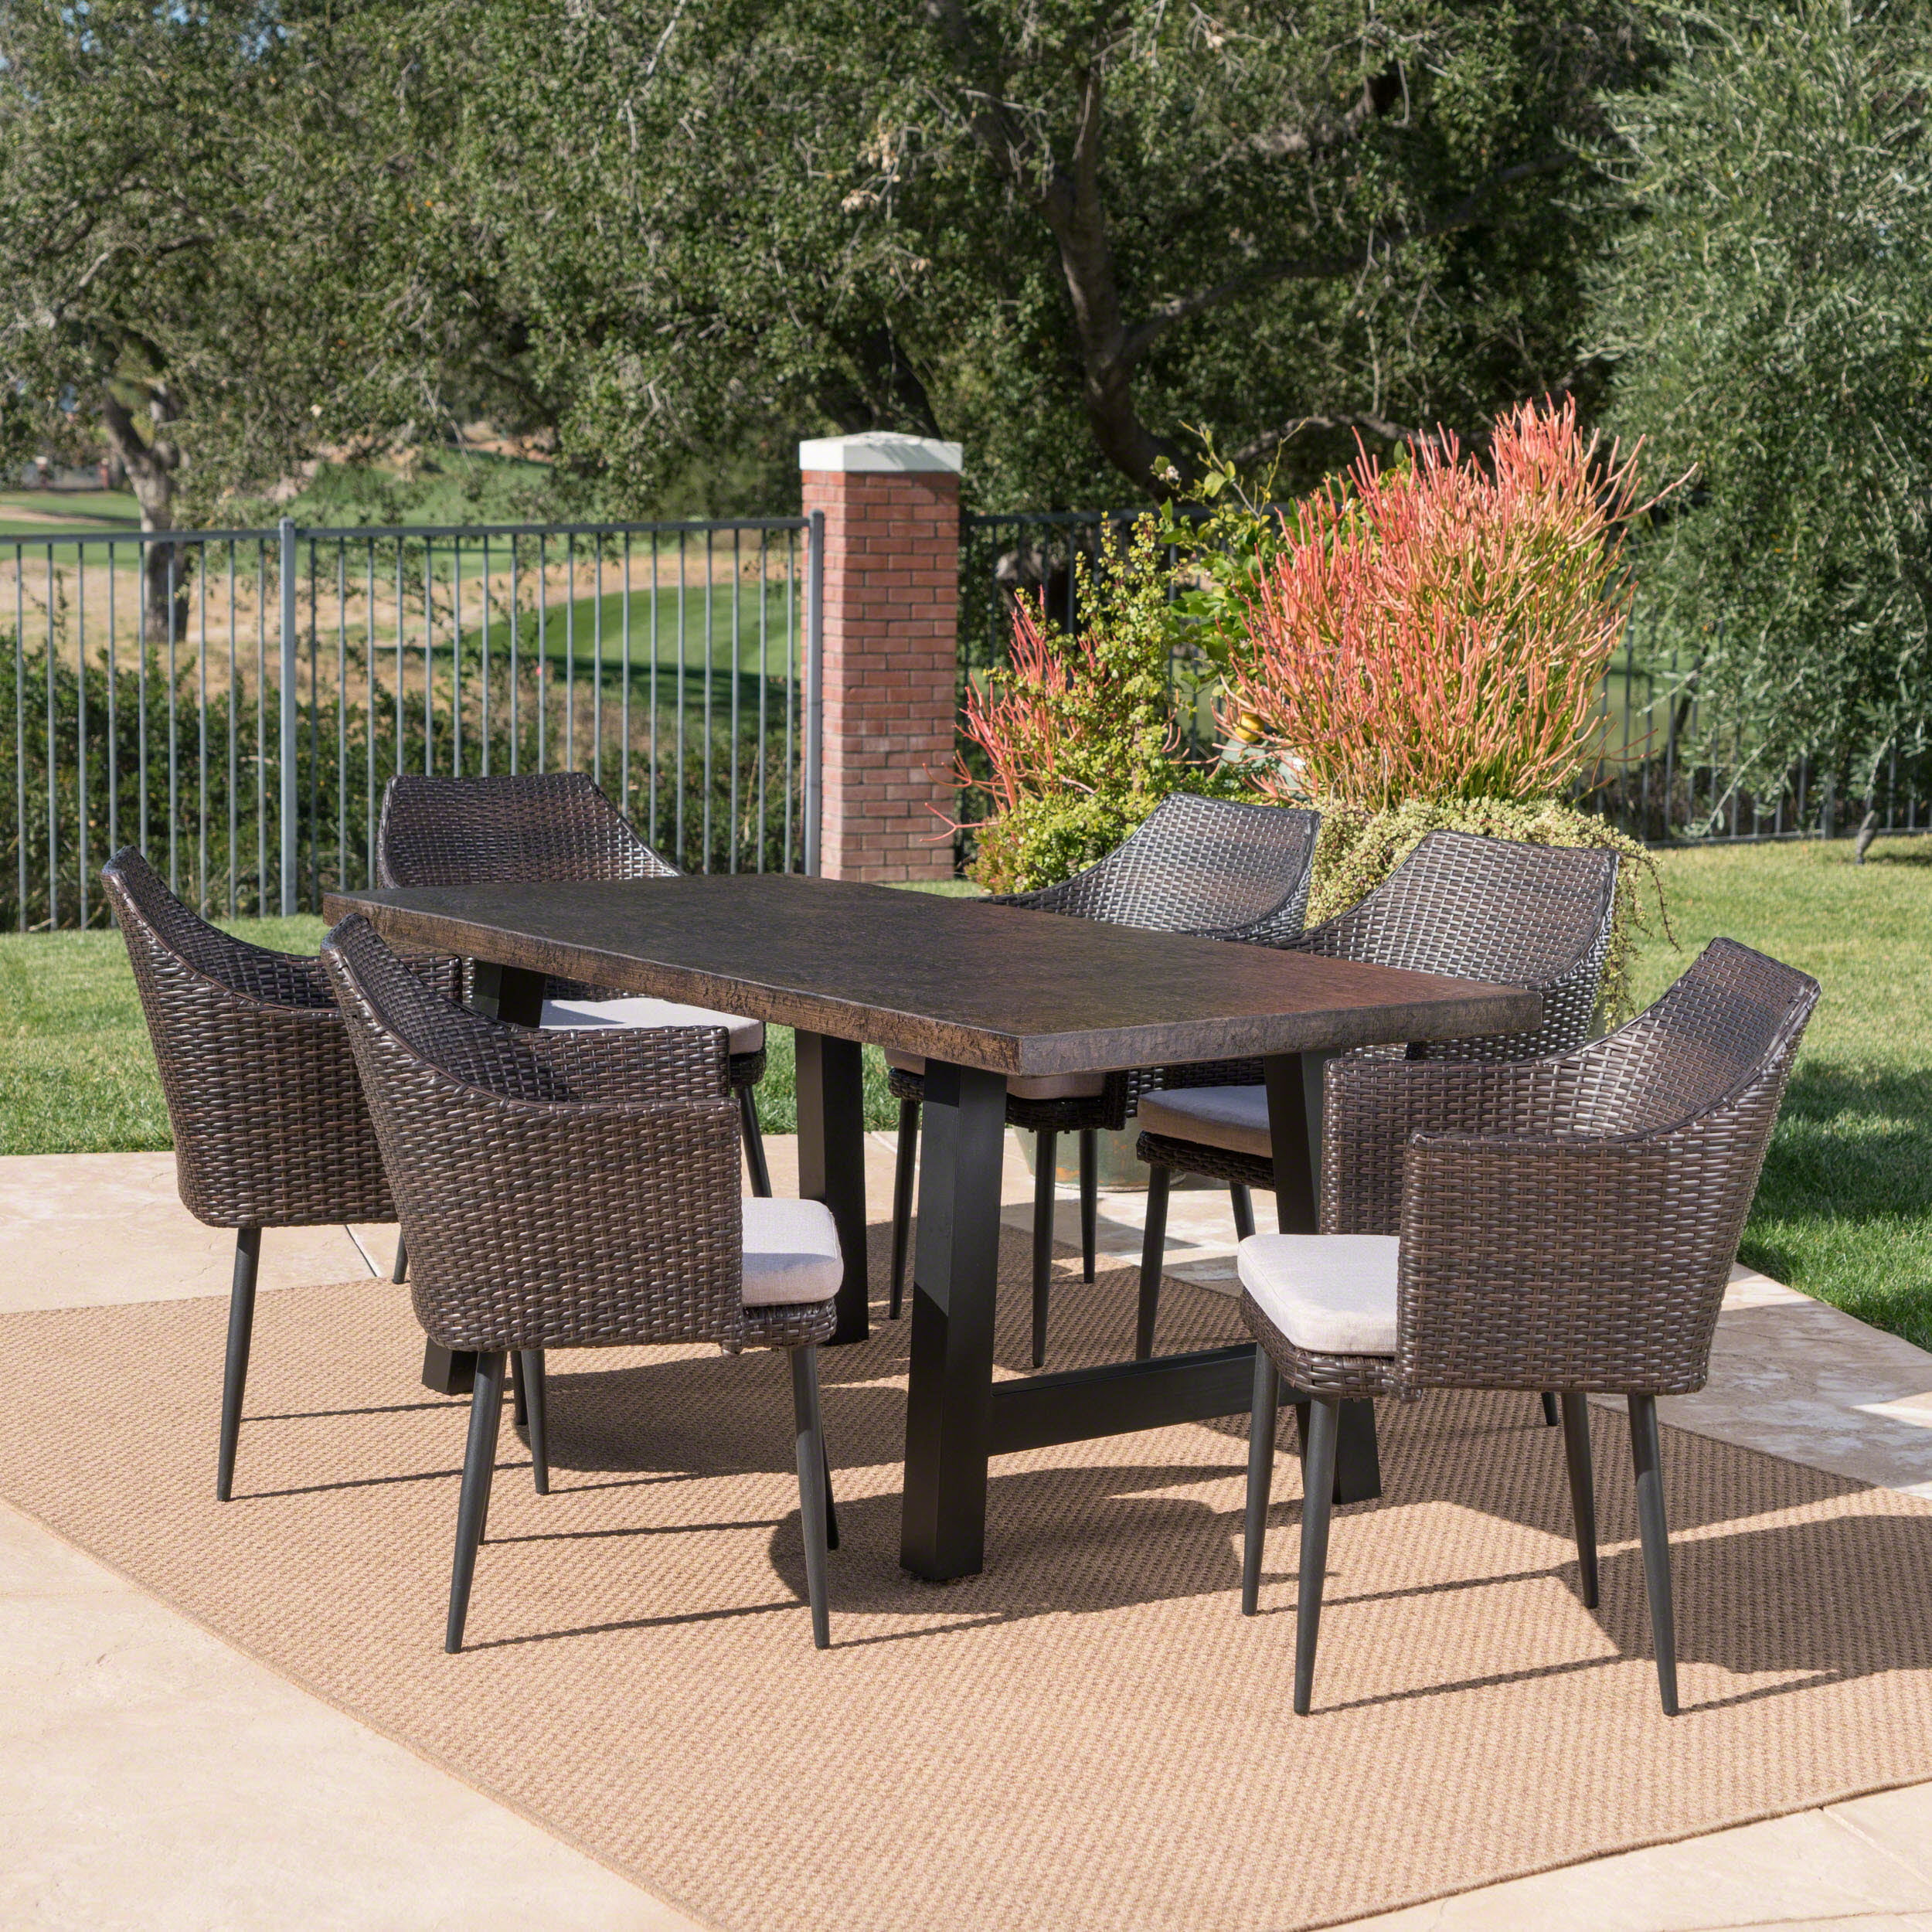 Porter Outdoor 7 Piece Wicker Dining Set with Light Weight Concrete ...